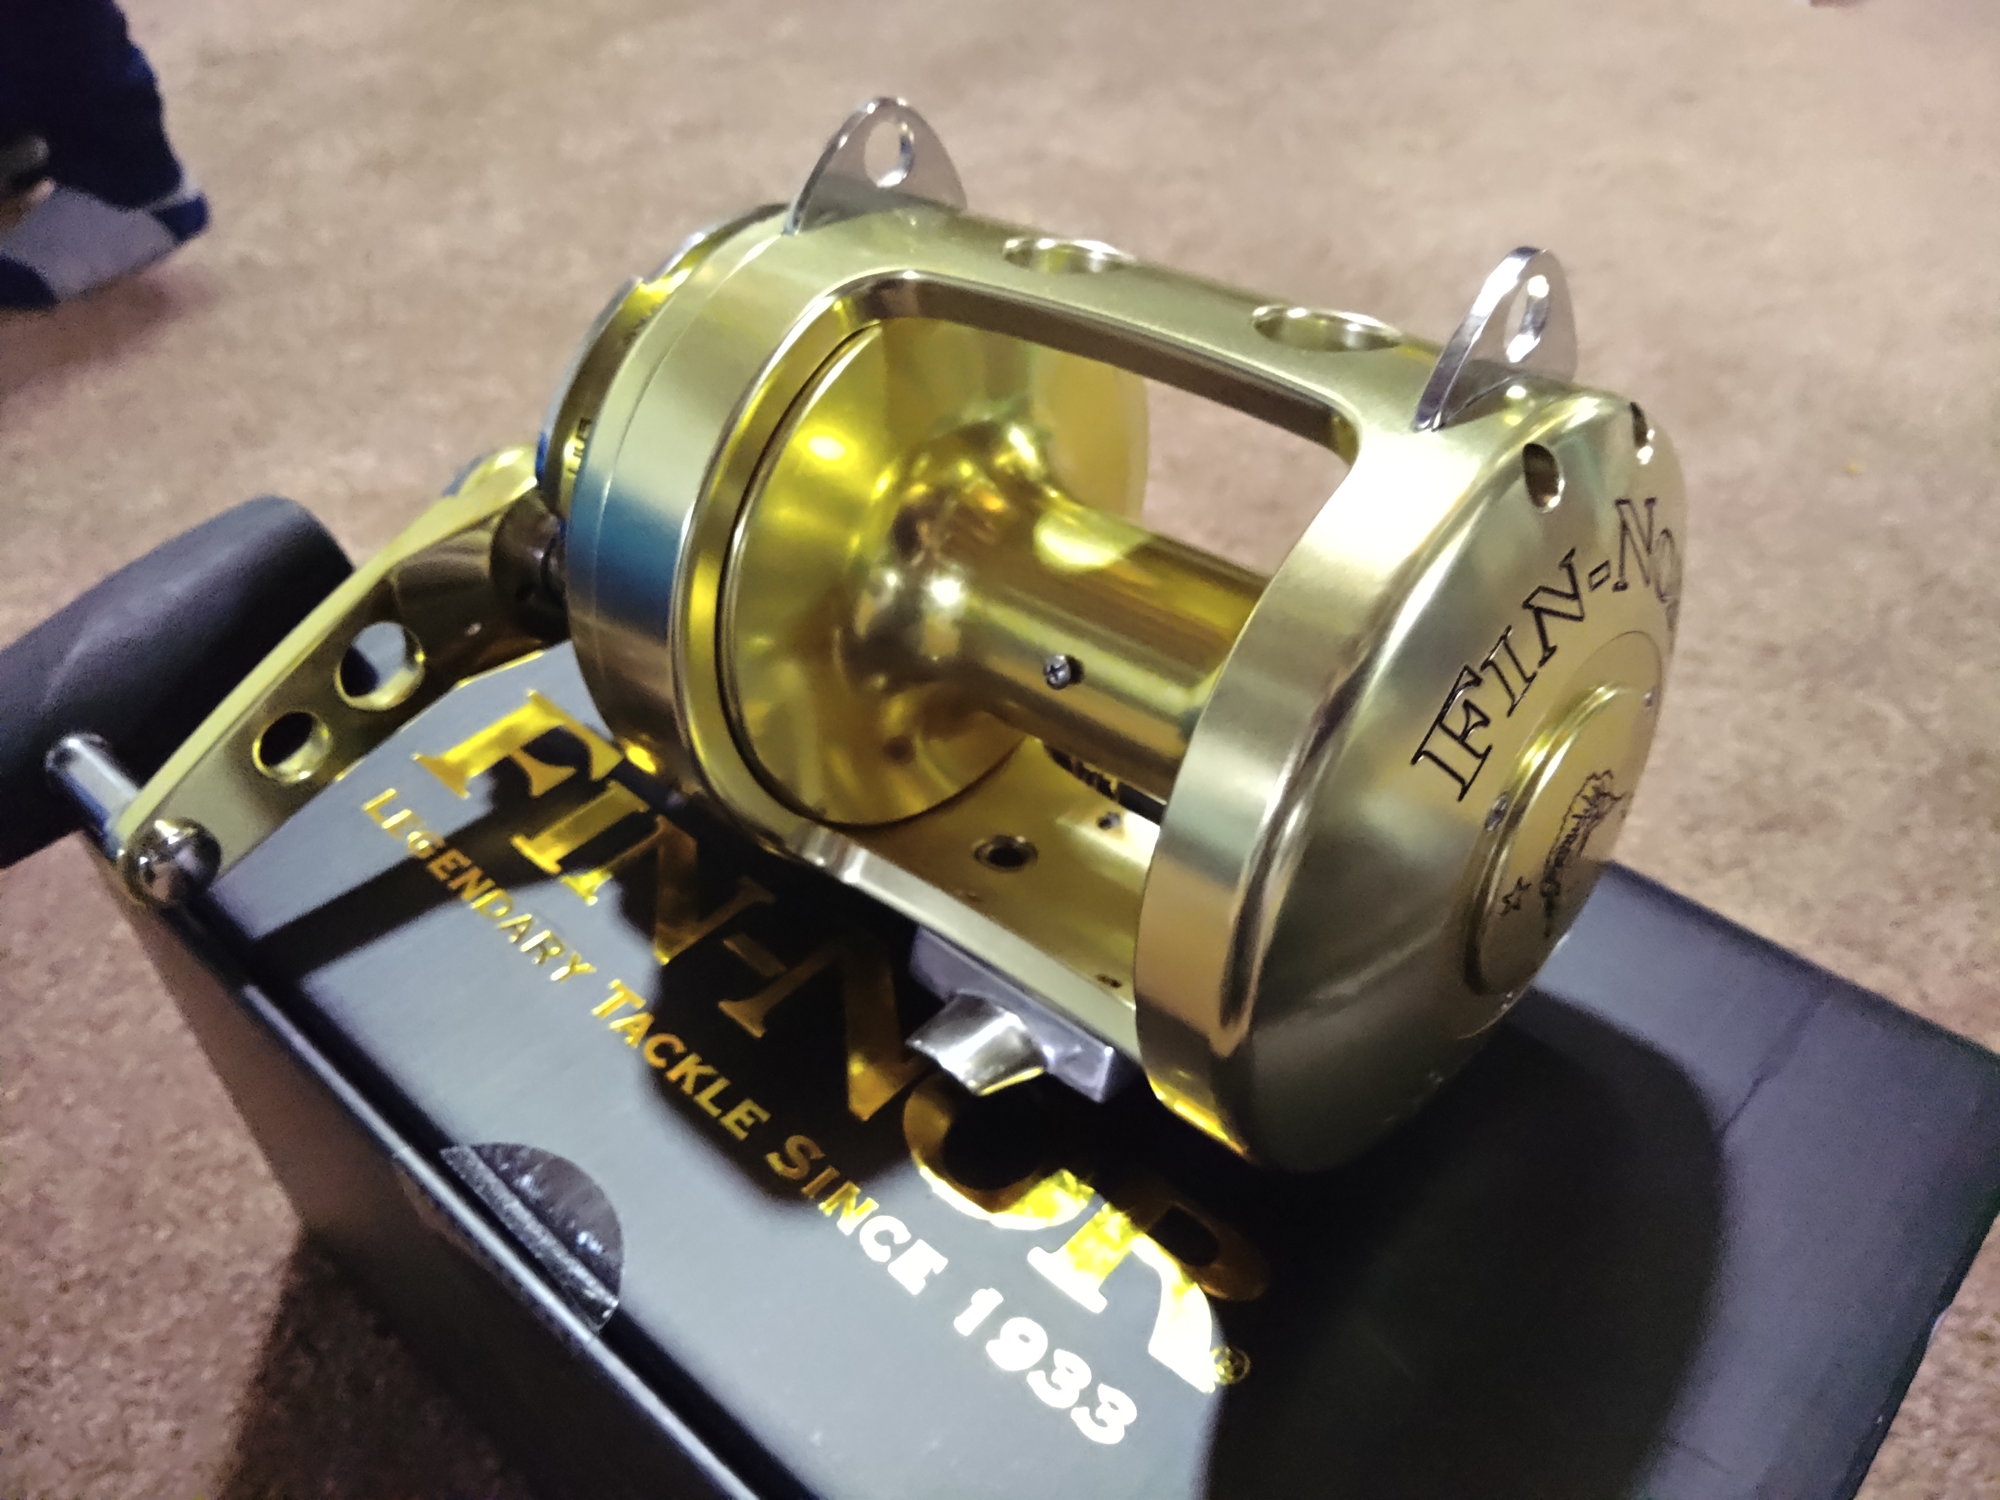 Fin nor Santiago 30w reels new - The Hull Truth - Boating and Fishing Forum